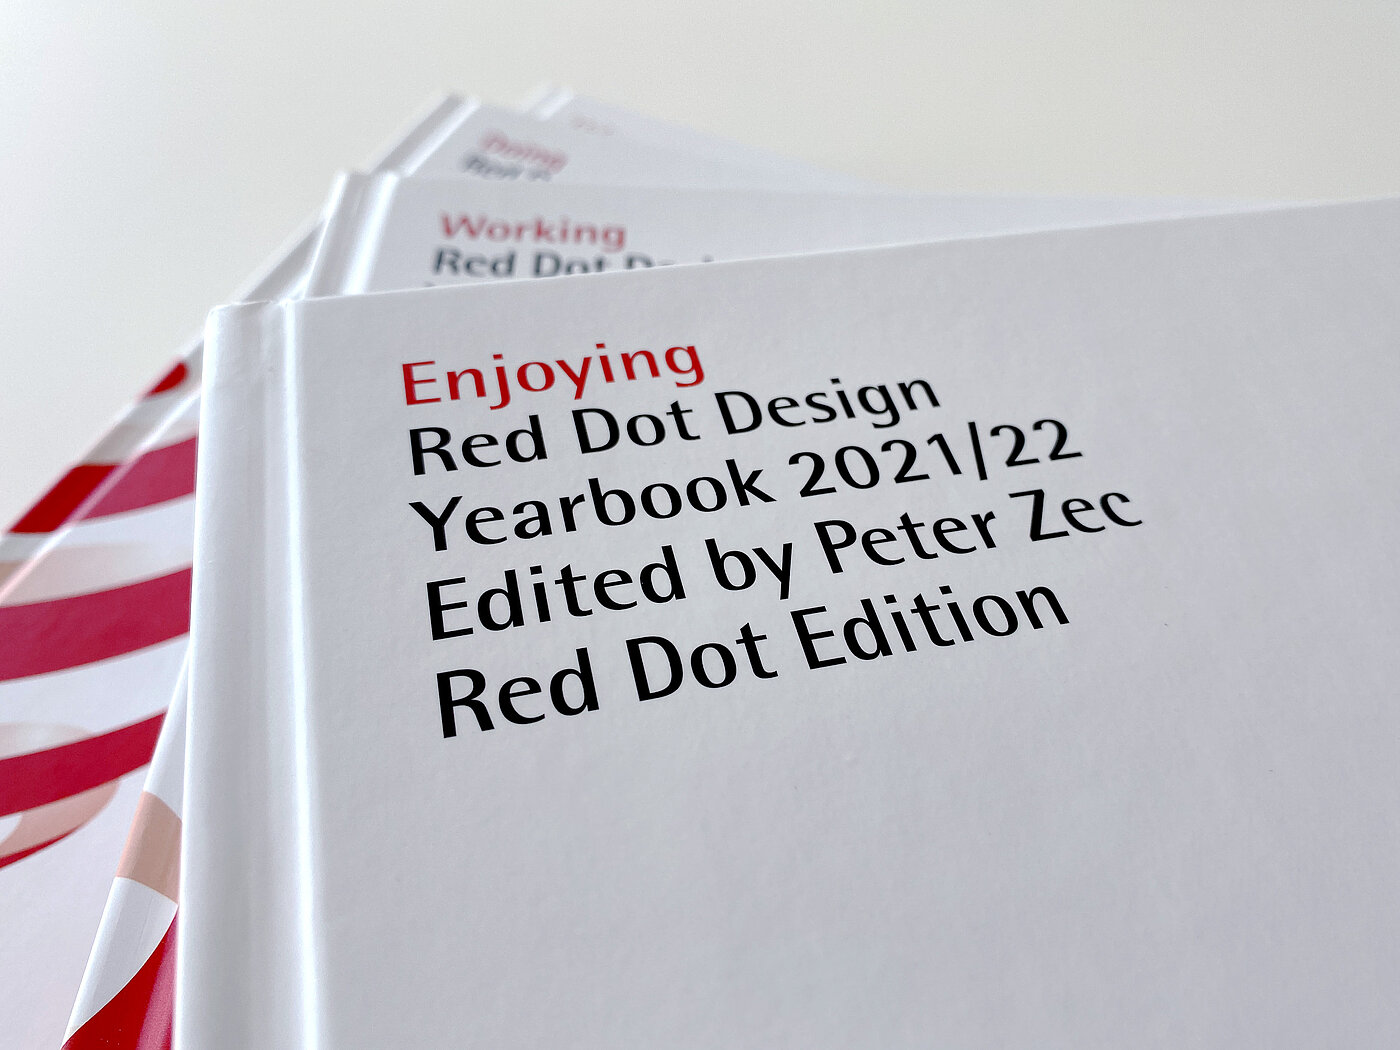 Close-up of the cover of the Red Dot Design Yearbook 2021/22